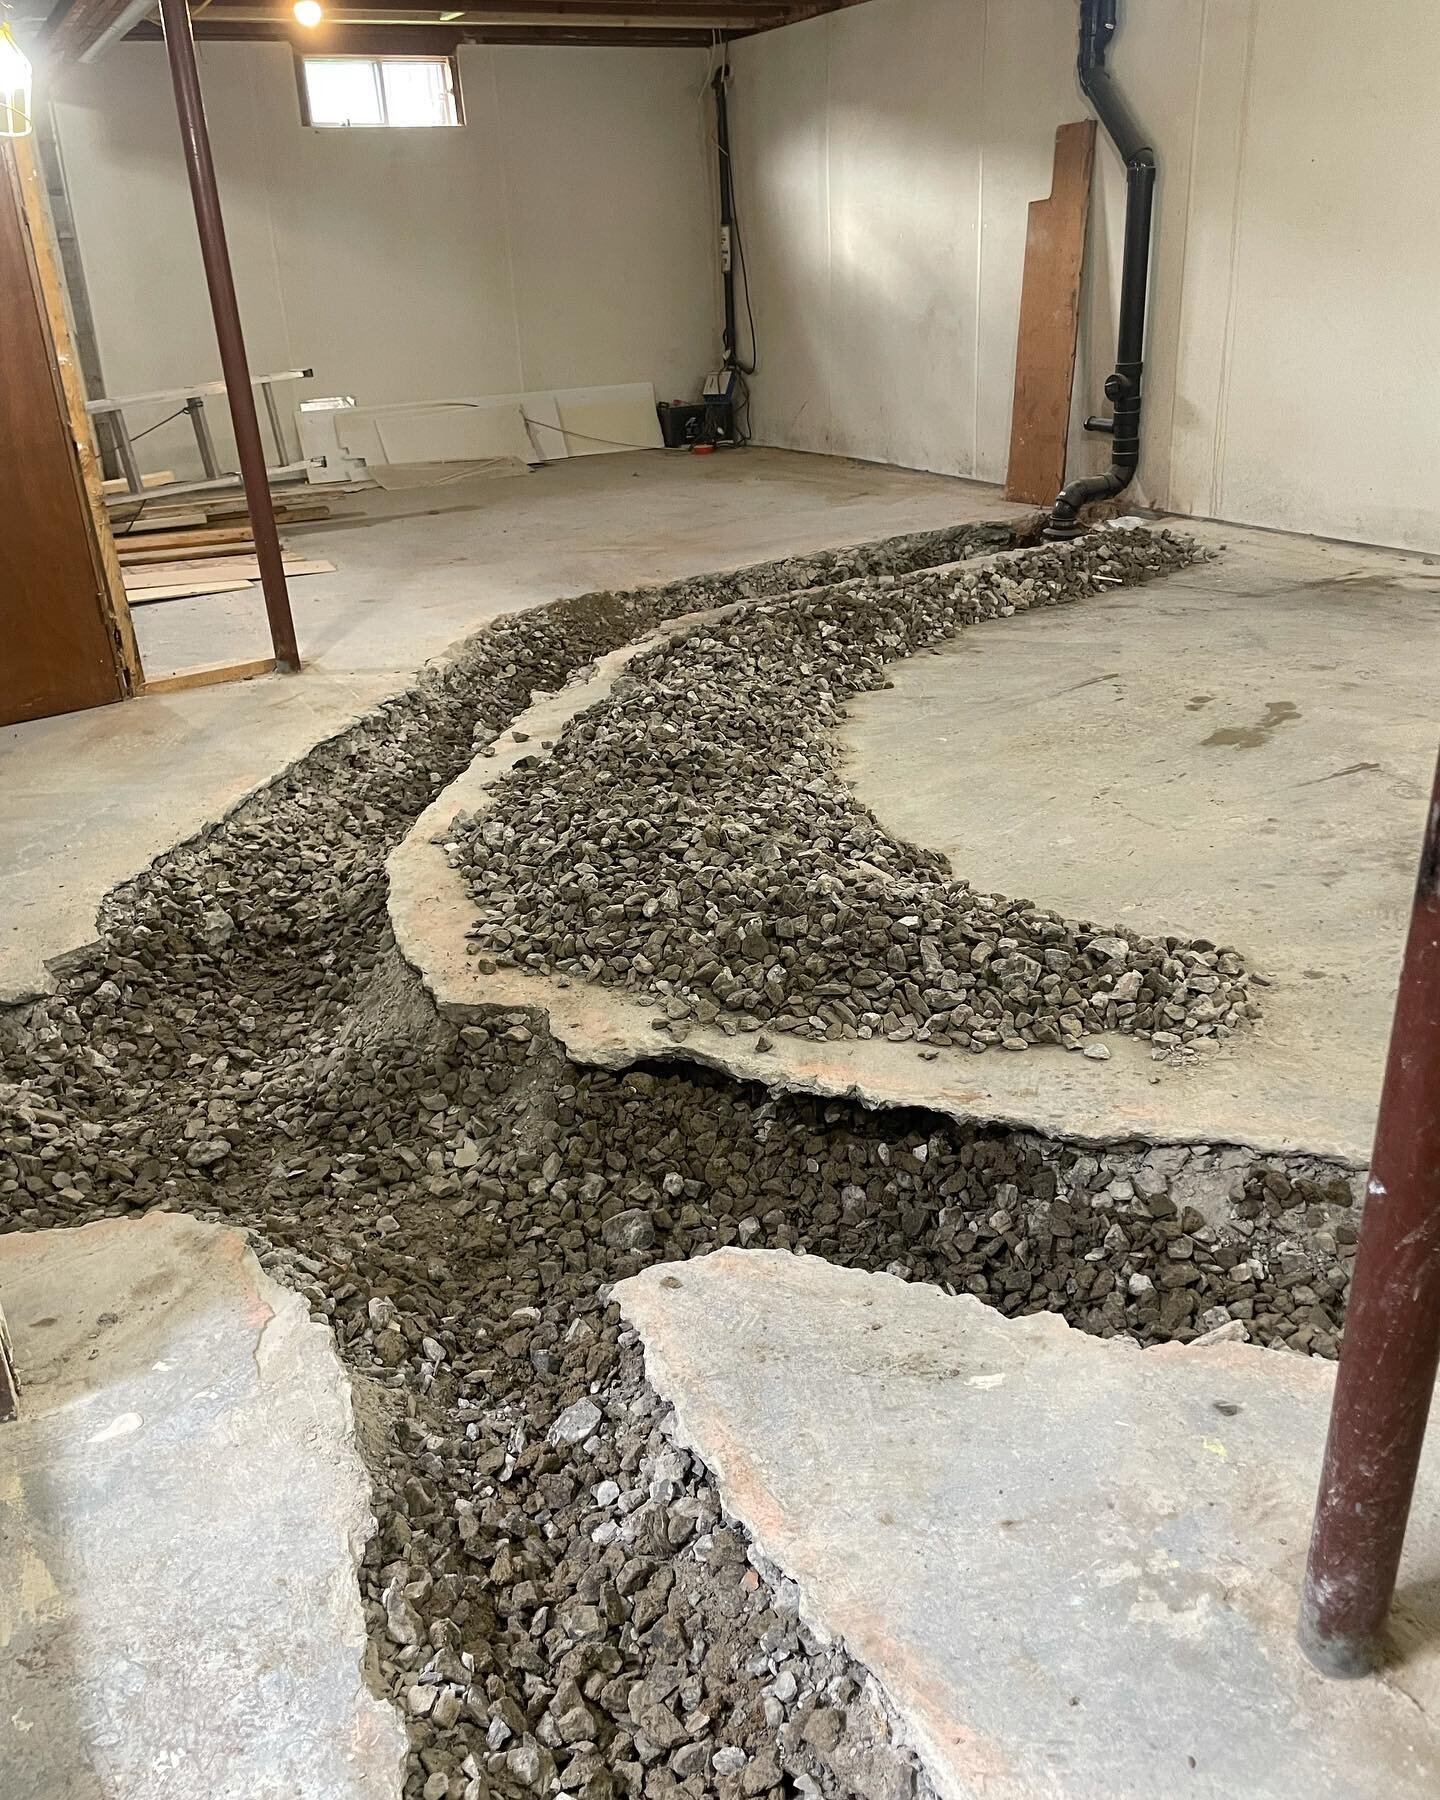 A plumbers dream! If you are a plumber, you know you&rsquo;d love to show up on site and have this just waiting for you. 💪🏼 #demolition #demo #renovations #renovation #hamilton #hamiltonrenovation #hamiltonrealestate #hamiltonrealtor #hamiltonprope